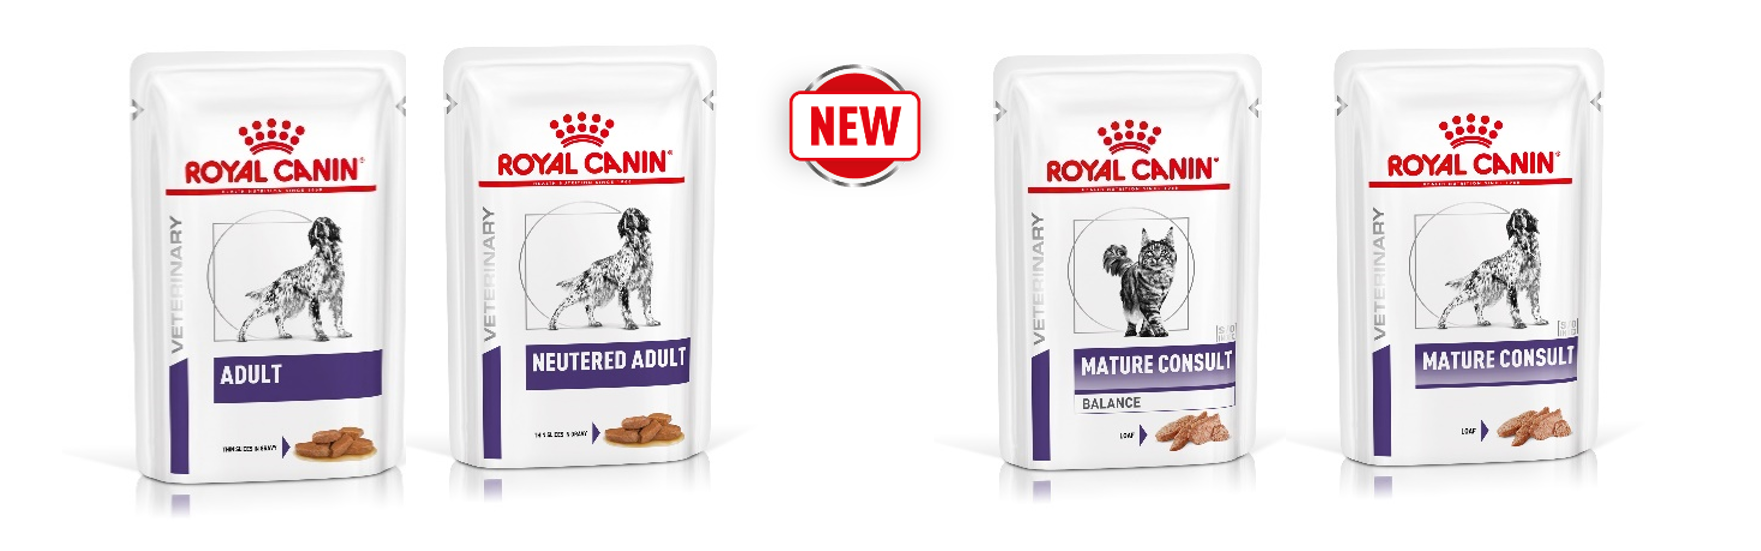 Royal Canin’s new Health Management range supports optimal health in cats and dogs